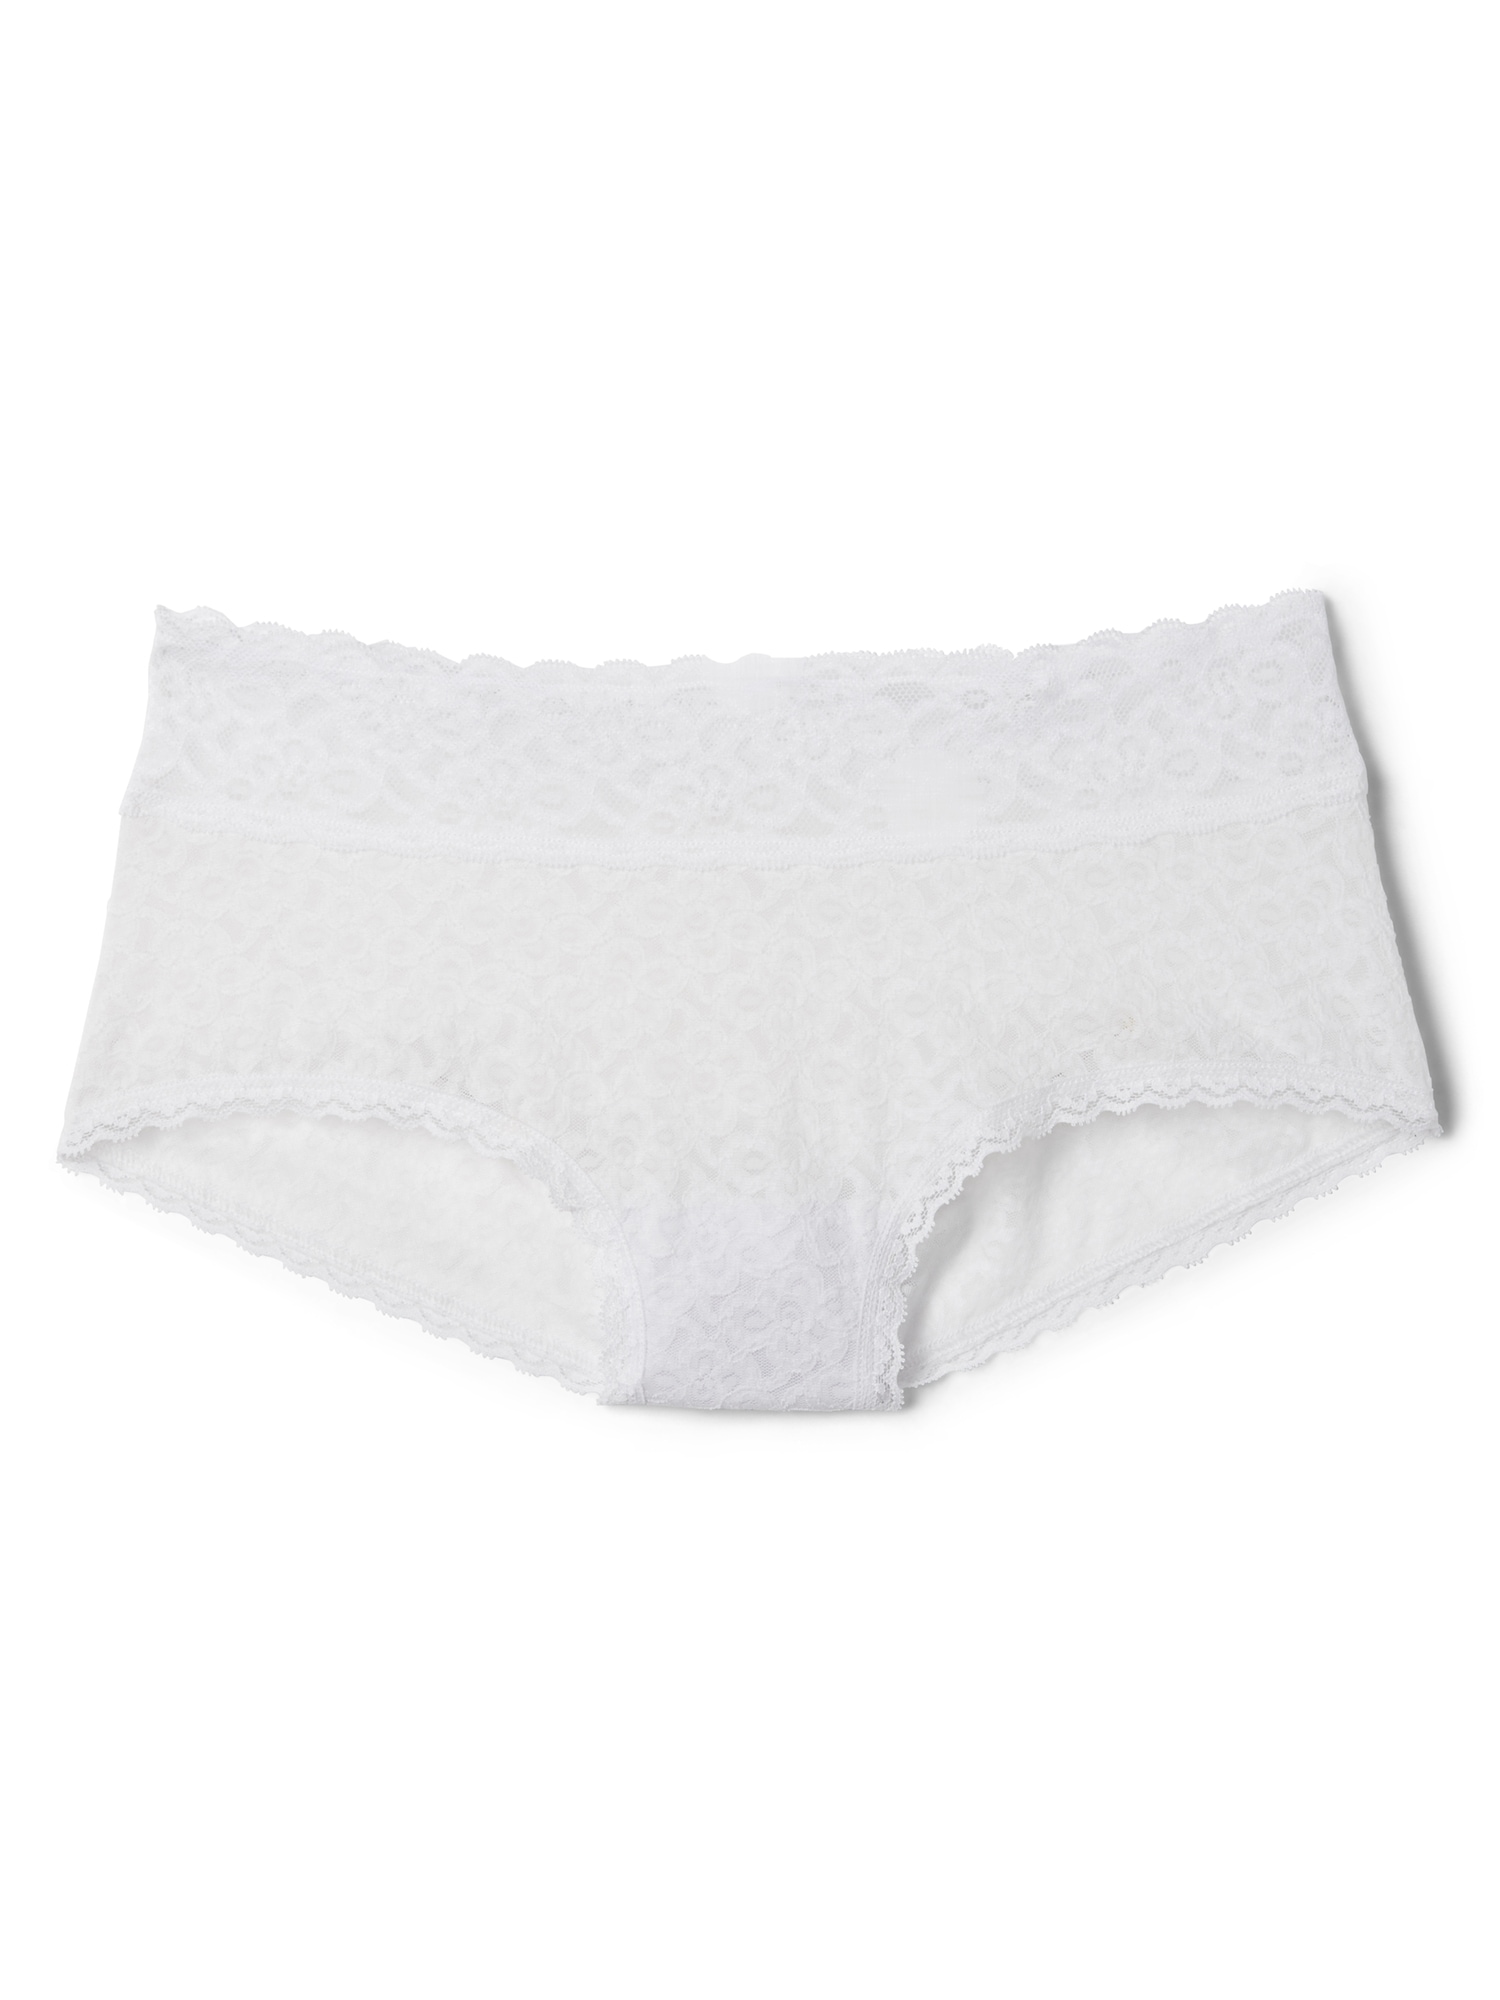 Gap Lace Shorty In White